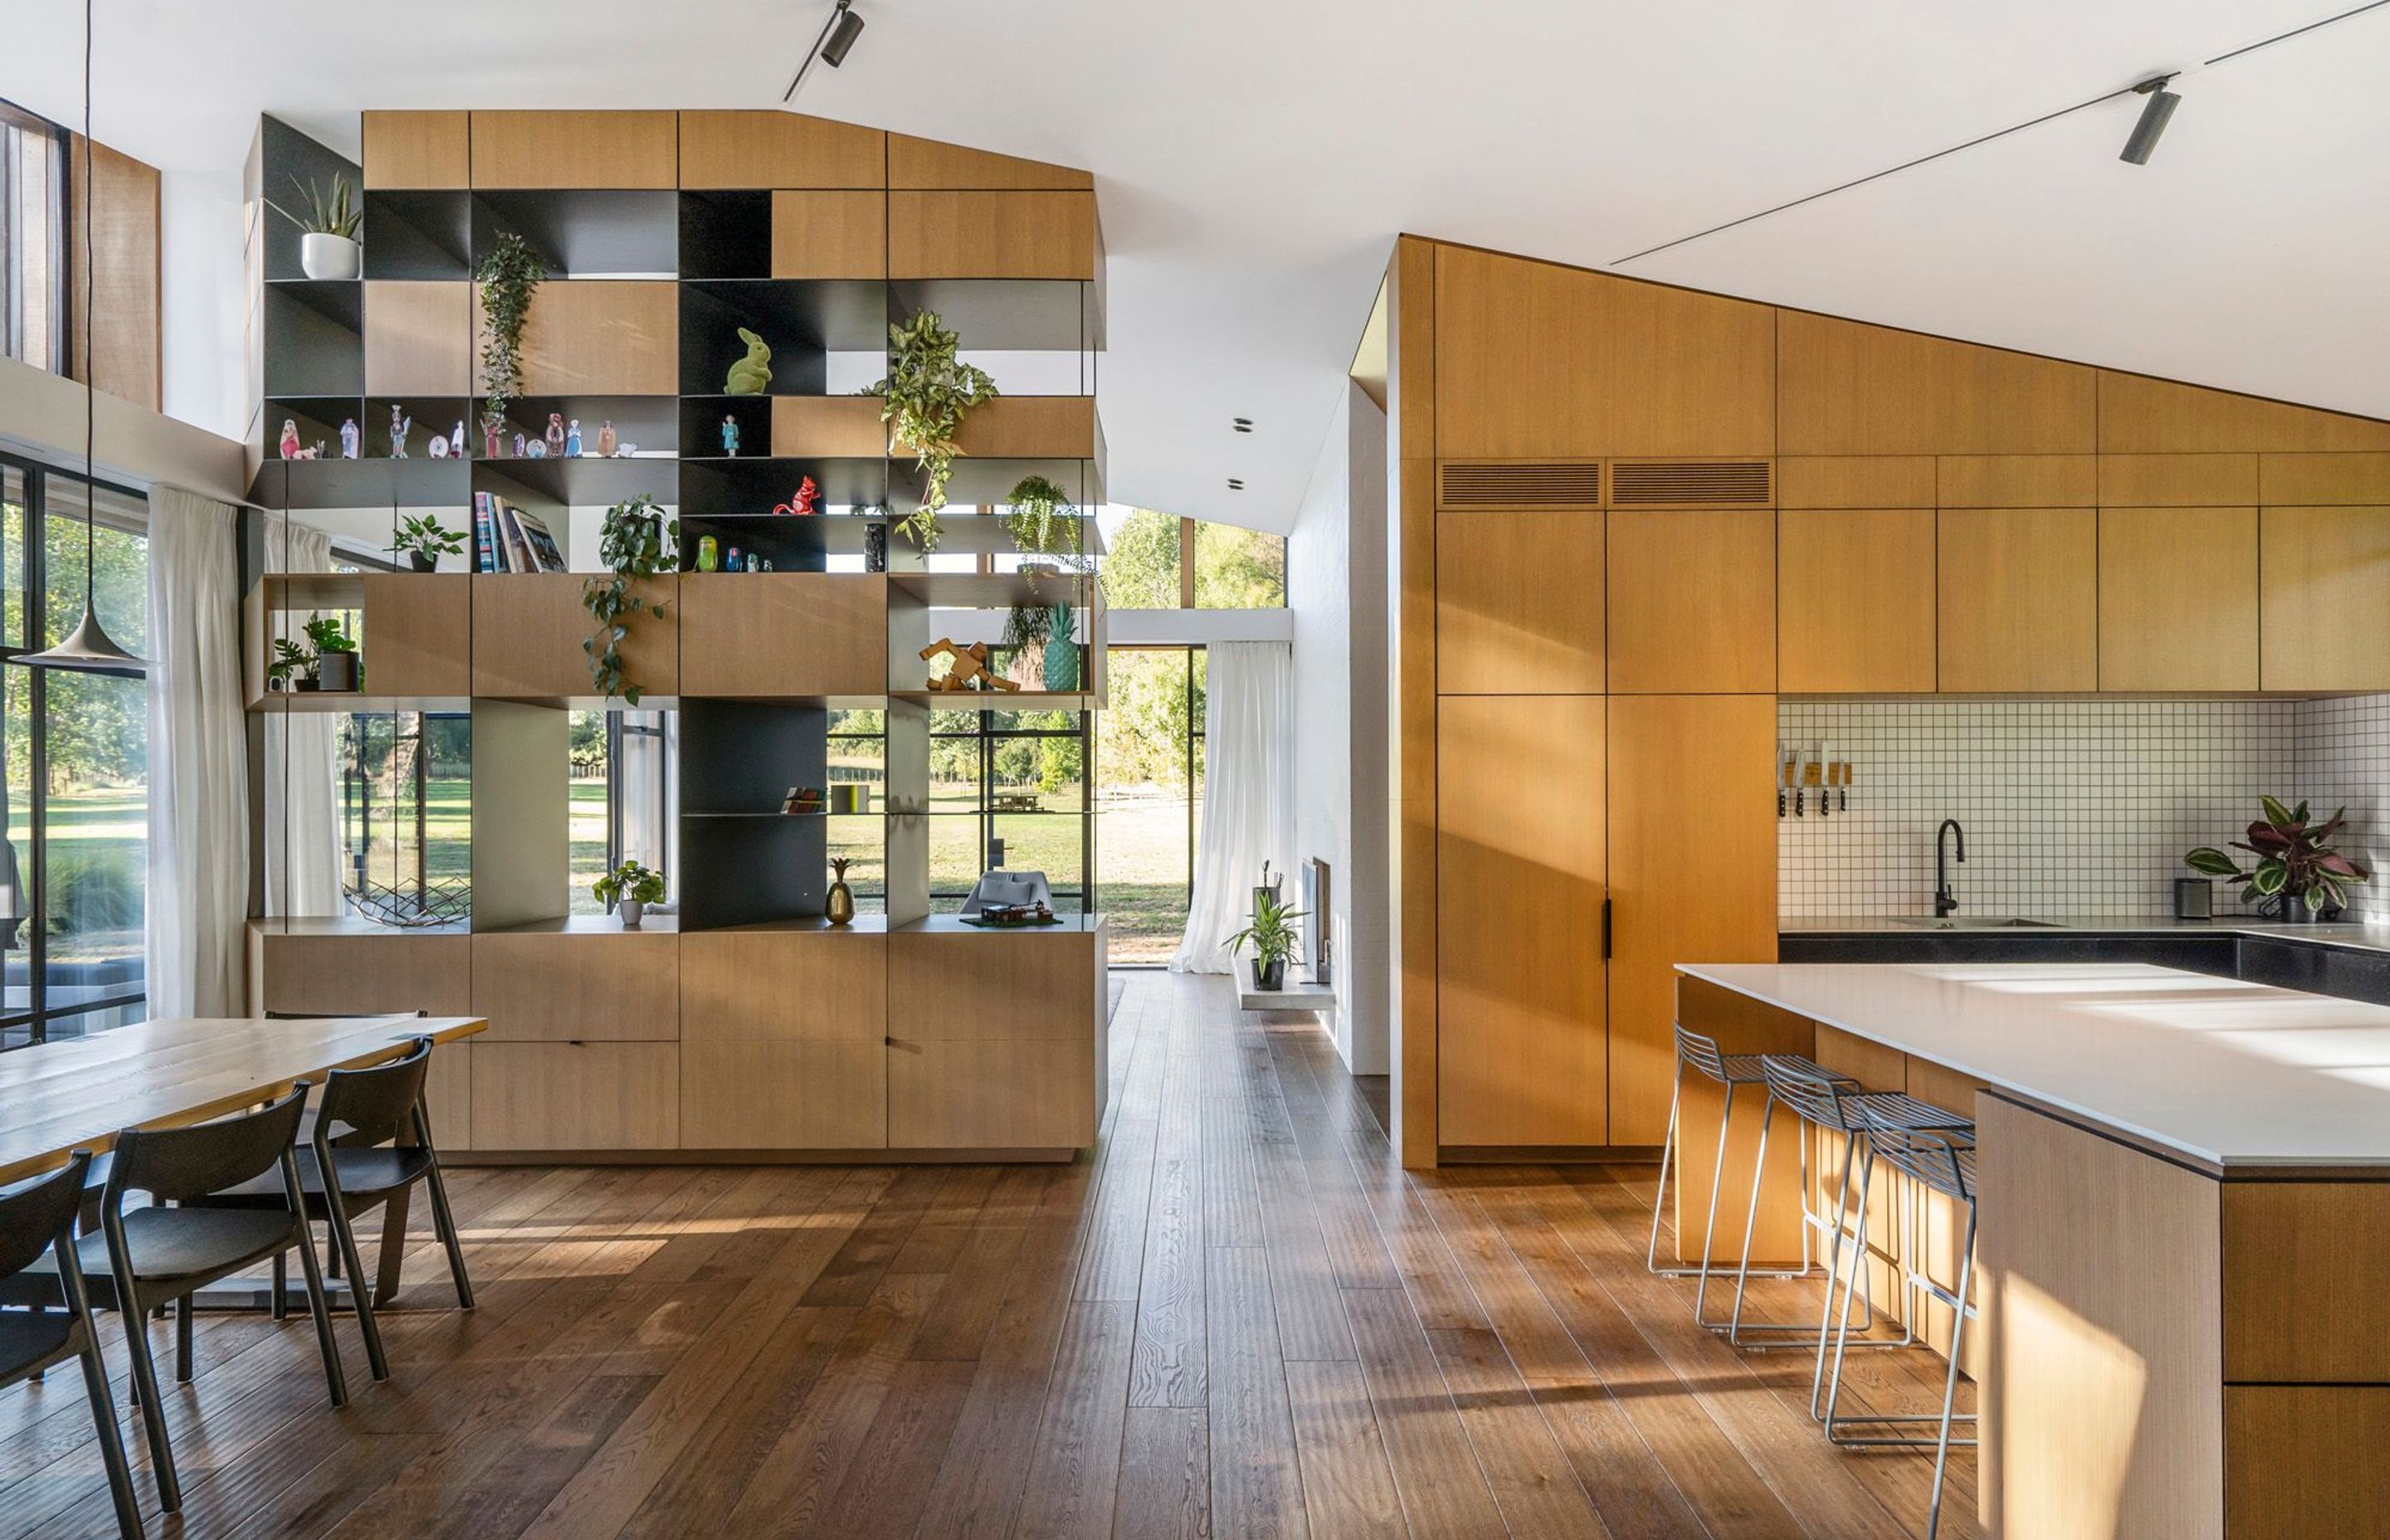 High ceilings, a quirky roof line and industrial elements, like the steel folding doors, are balanced by the warmth of natural timbers – seen in the oak flooring and cabinetry.